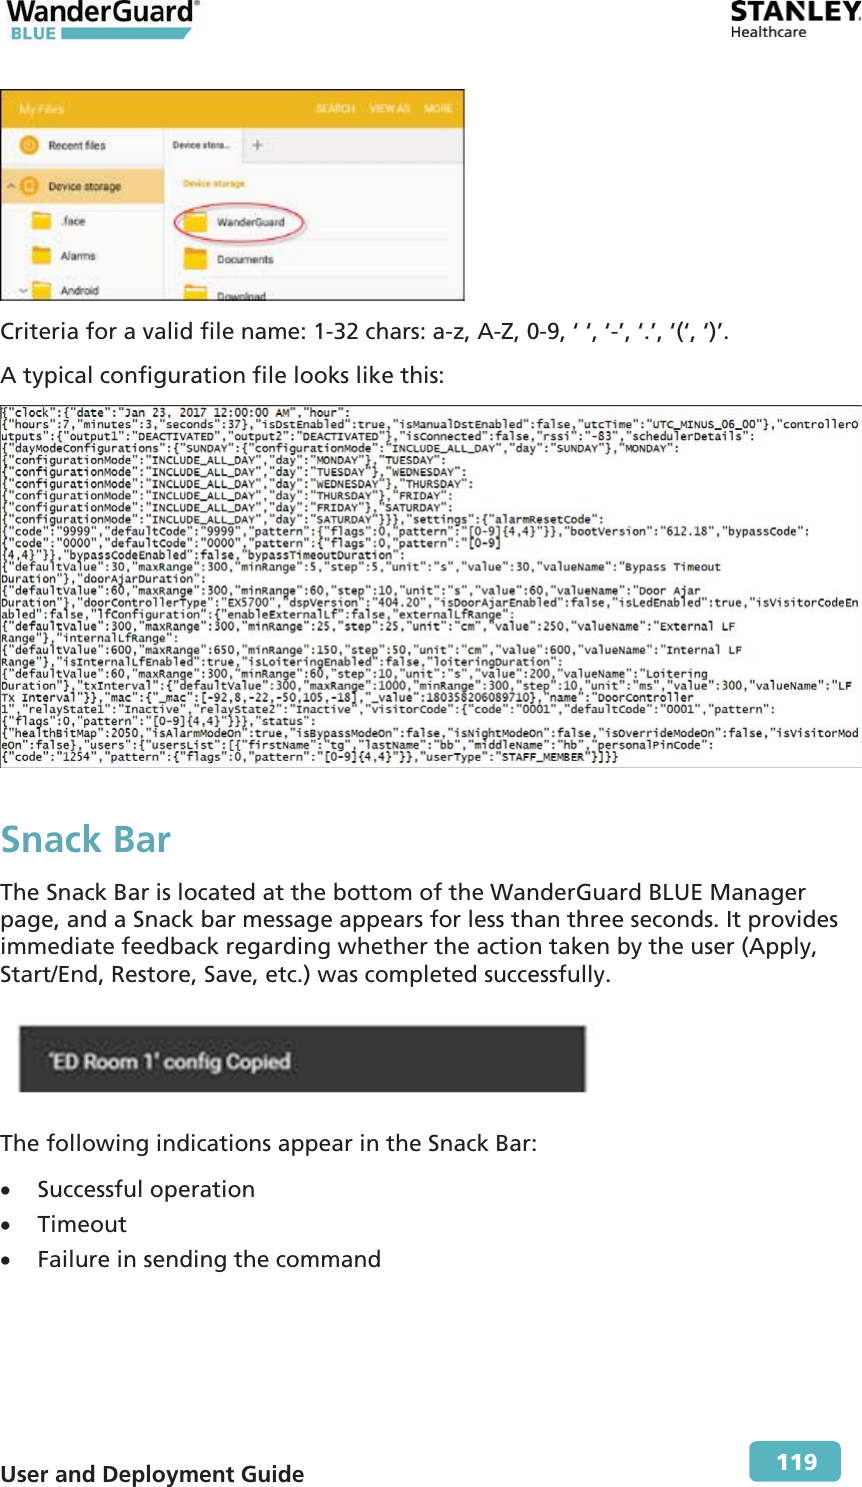  User and Deployment Guide        119  Criteria for a valid file name: 1-32 chars: a-z, A-Z, 0-9, ‘ ‘, ‘-’, ‘.’, ‘(‘, ‘)’. A typical configuration file looks like this:  Snack Bar The Snack Bar is located at the bottom of the WanderGuard BLUE Manager page, and a Snack bar message appears for less than three seconds. It provides immediate feedback regarding whether the action taken by the user (Apply, Start/End, Restore, Save, etc.) was completed successfully.  The following indications appear in the Snack Bar: x Successful operation x Timeout x Failure in sending the command 